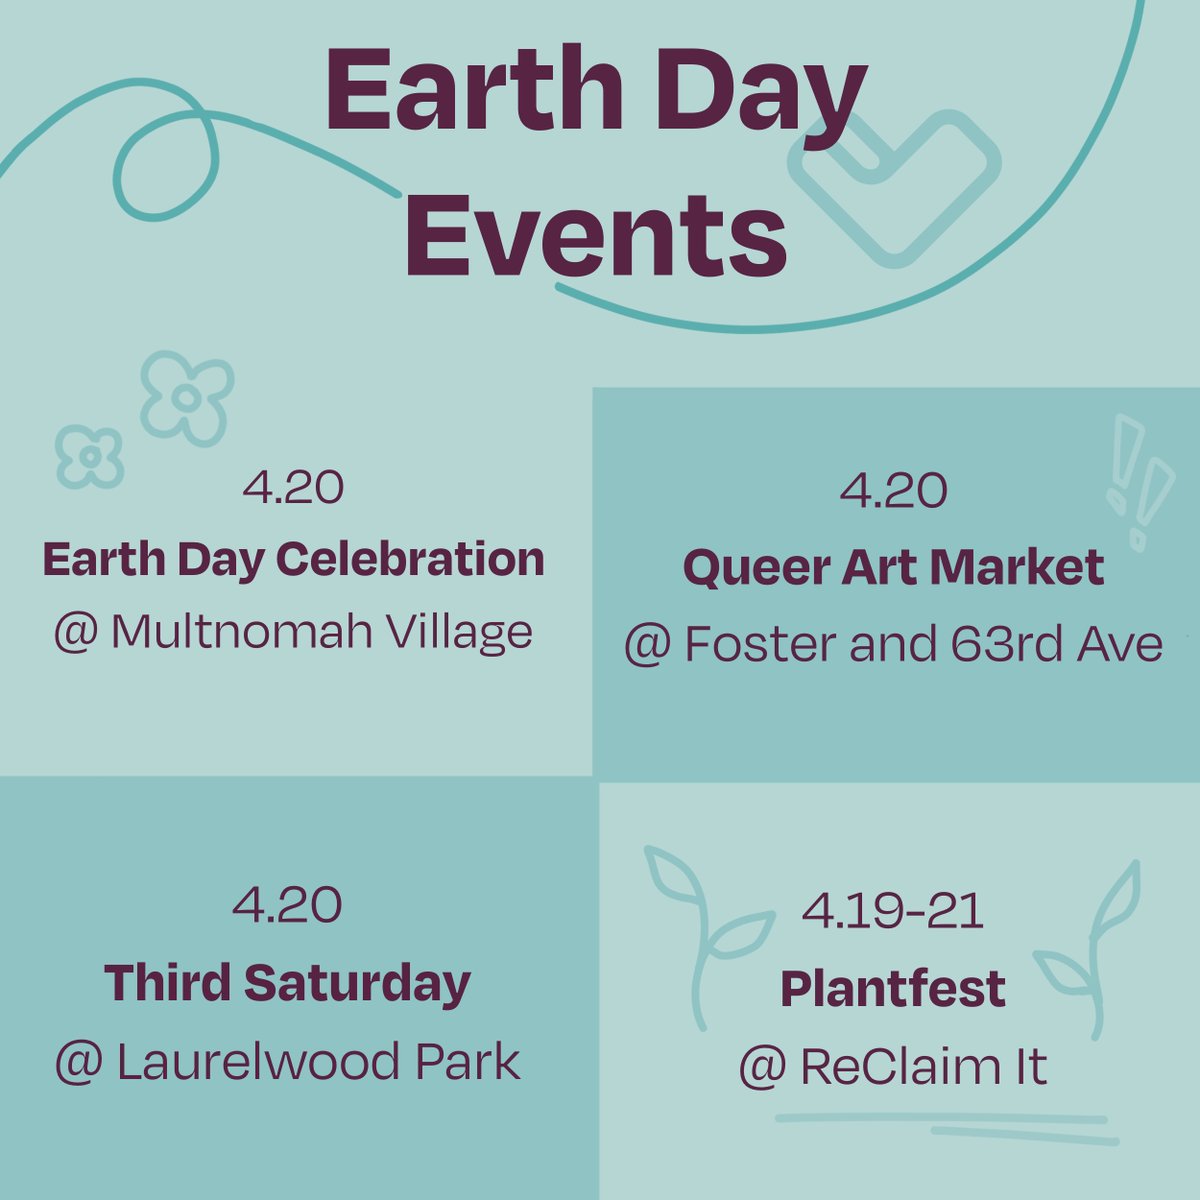 Celebrate this Earth Day by supporting local communities and promoting environmental sustainability through these fun and engaging activities!

#PDX #PDXEvents #Portland #EarthDay #ForritCU